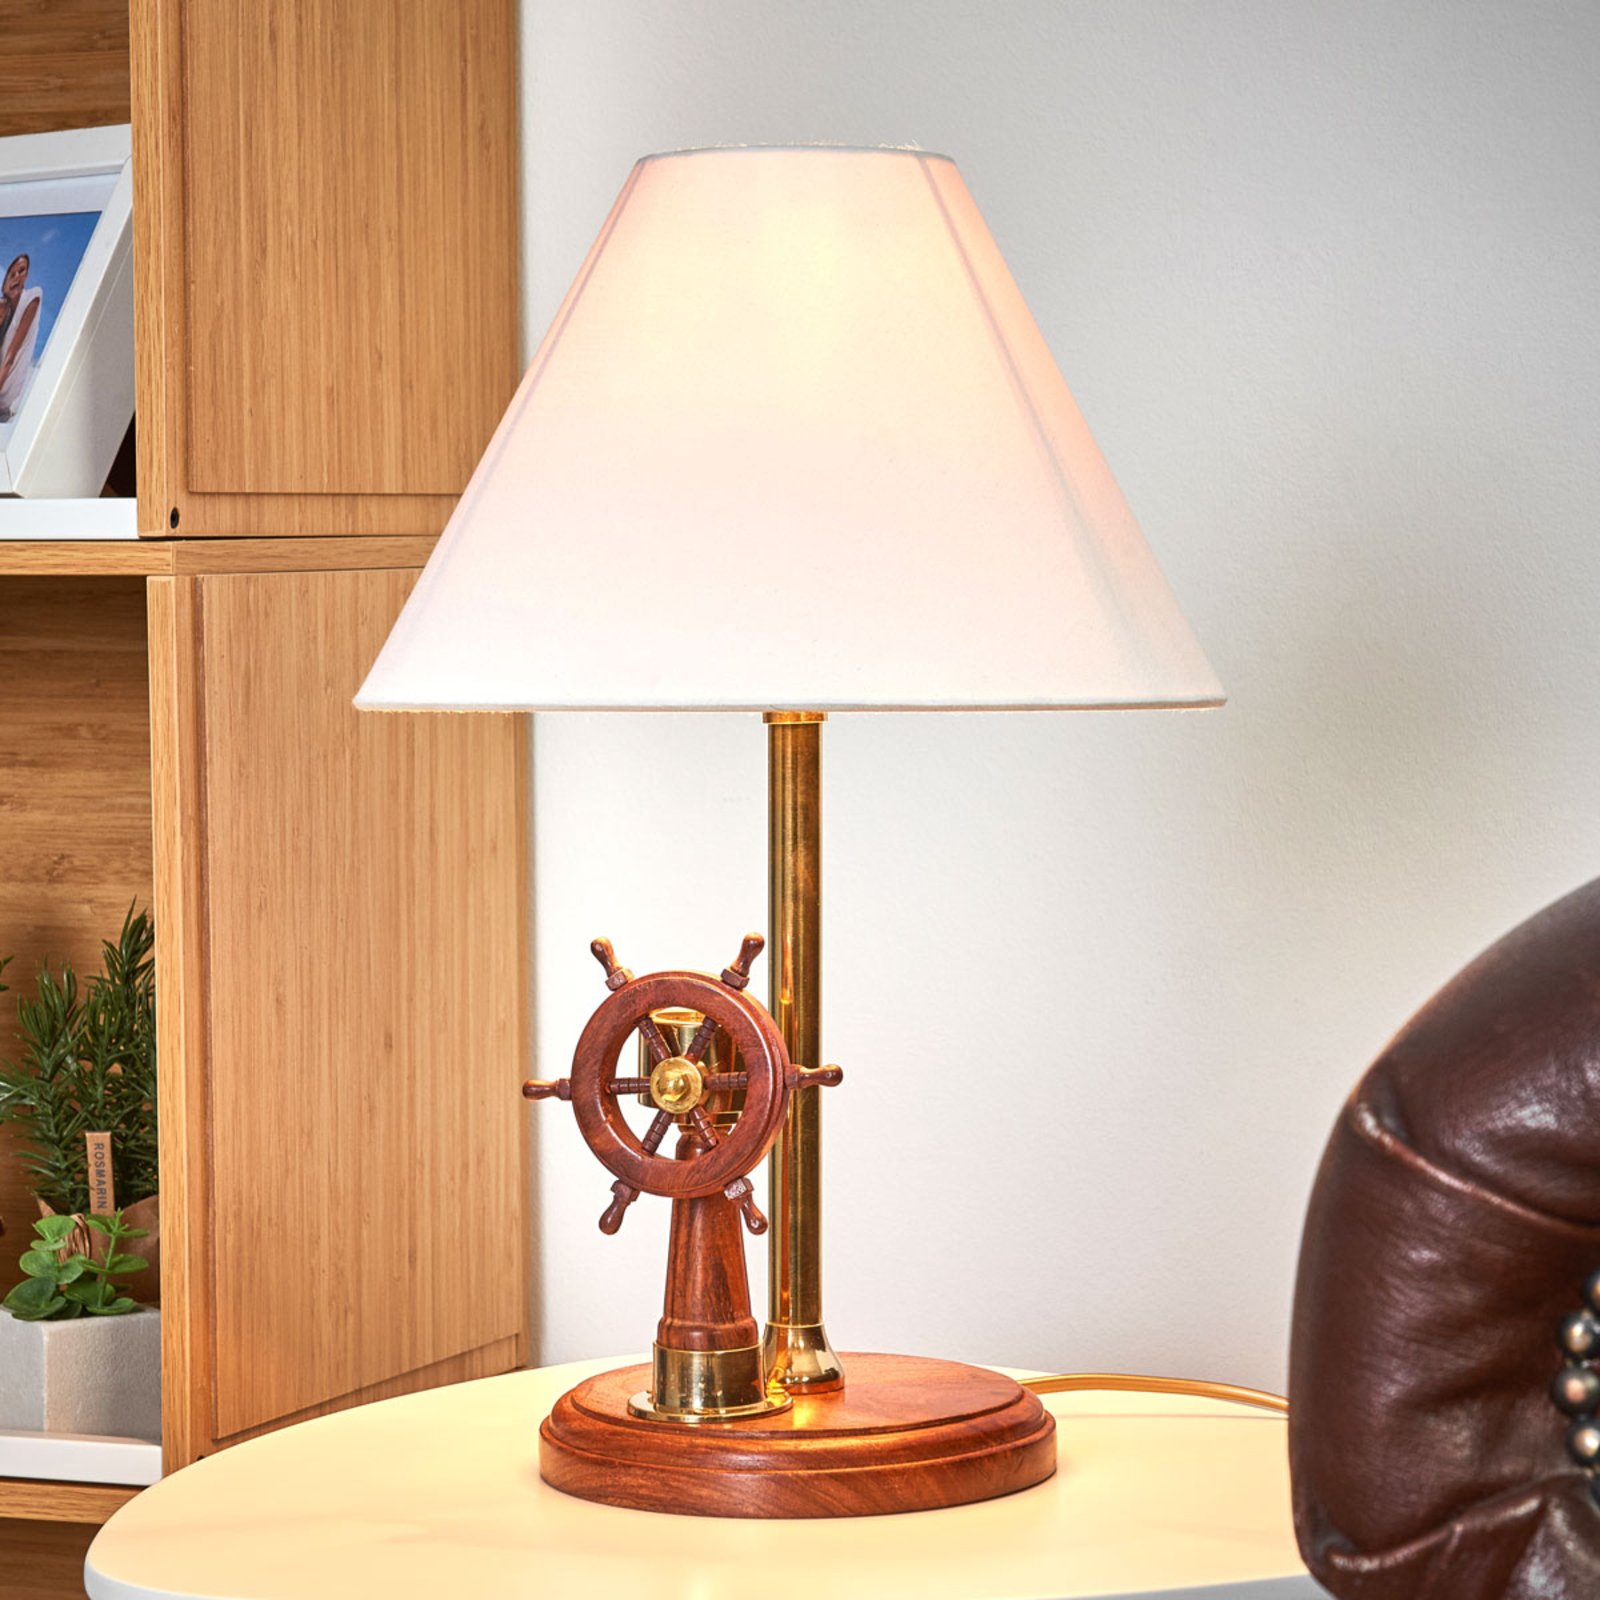 Brilliant table lamp Steering with wood